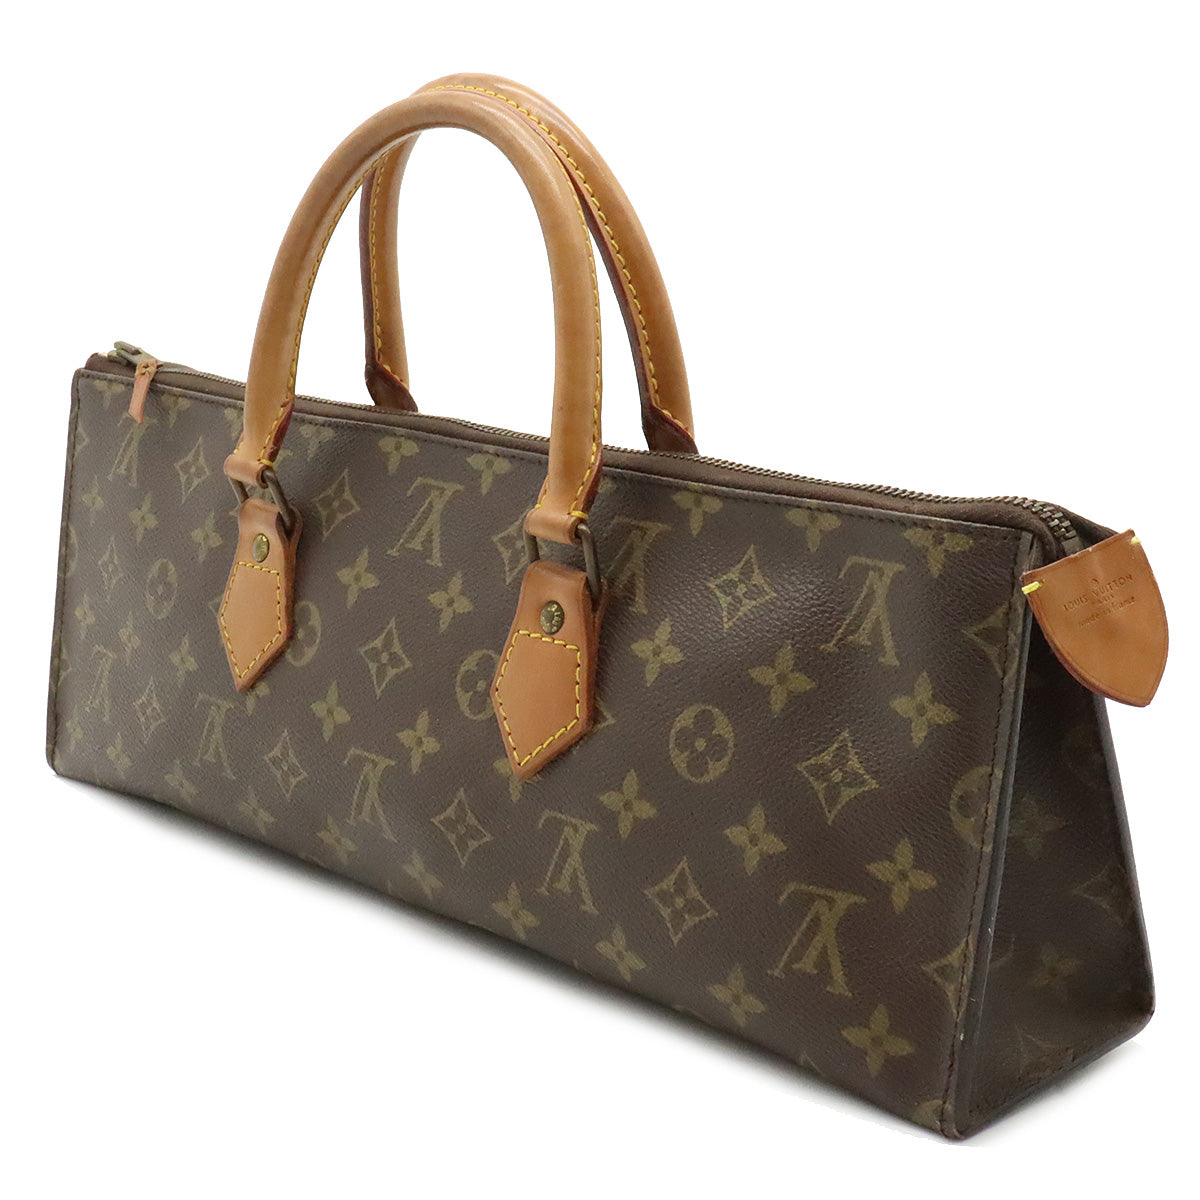 classic old louis vuitton bag styles